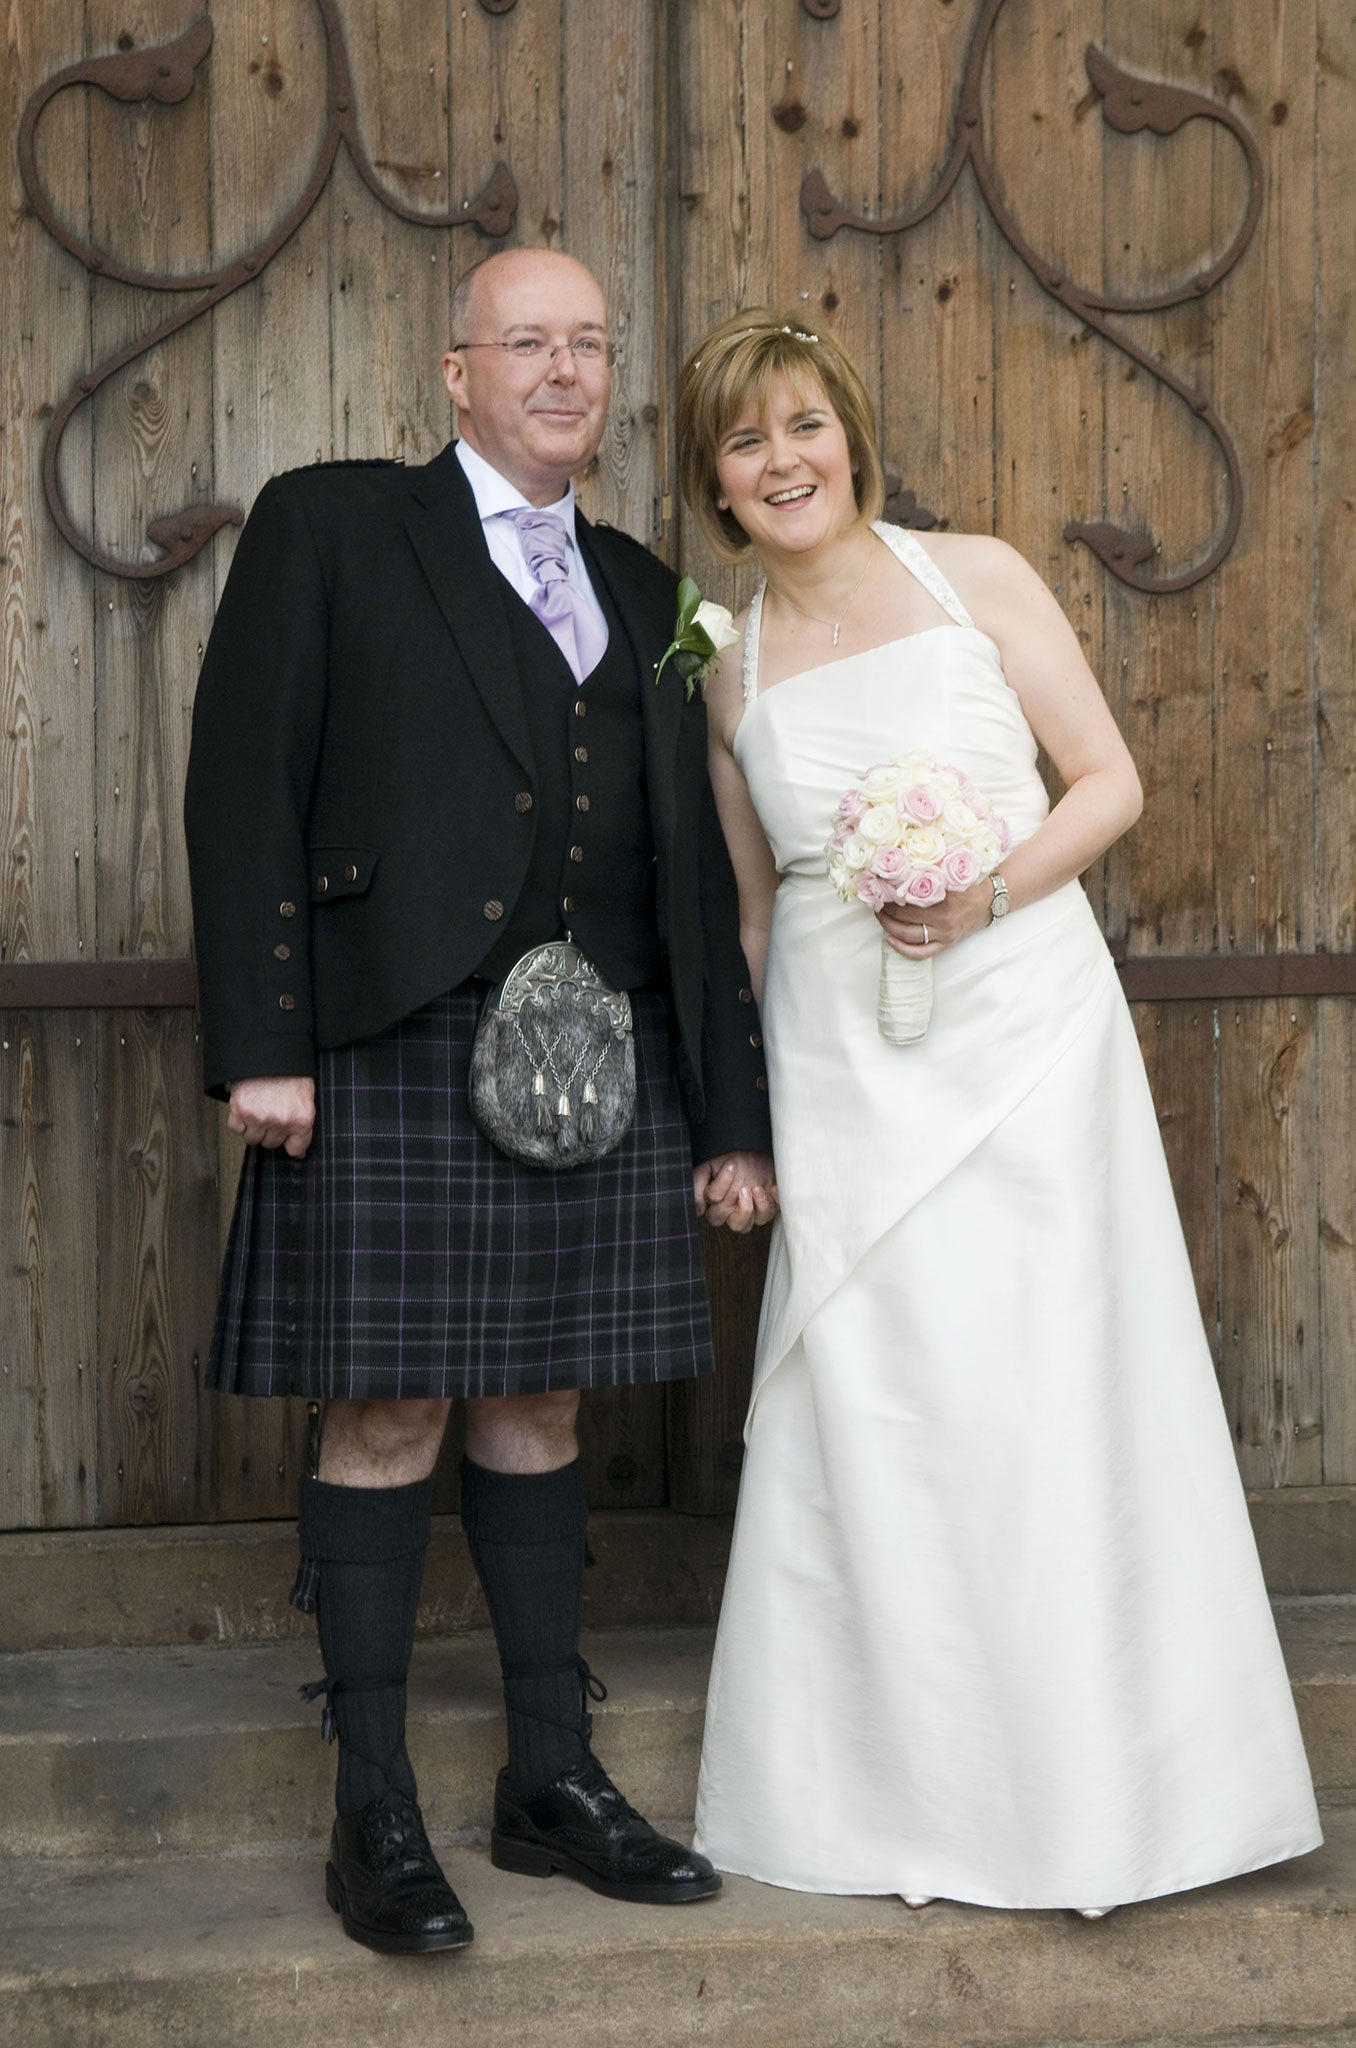 Ms Sturgeon on her wedding day with husband in 2010